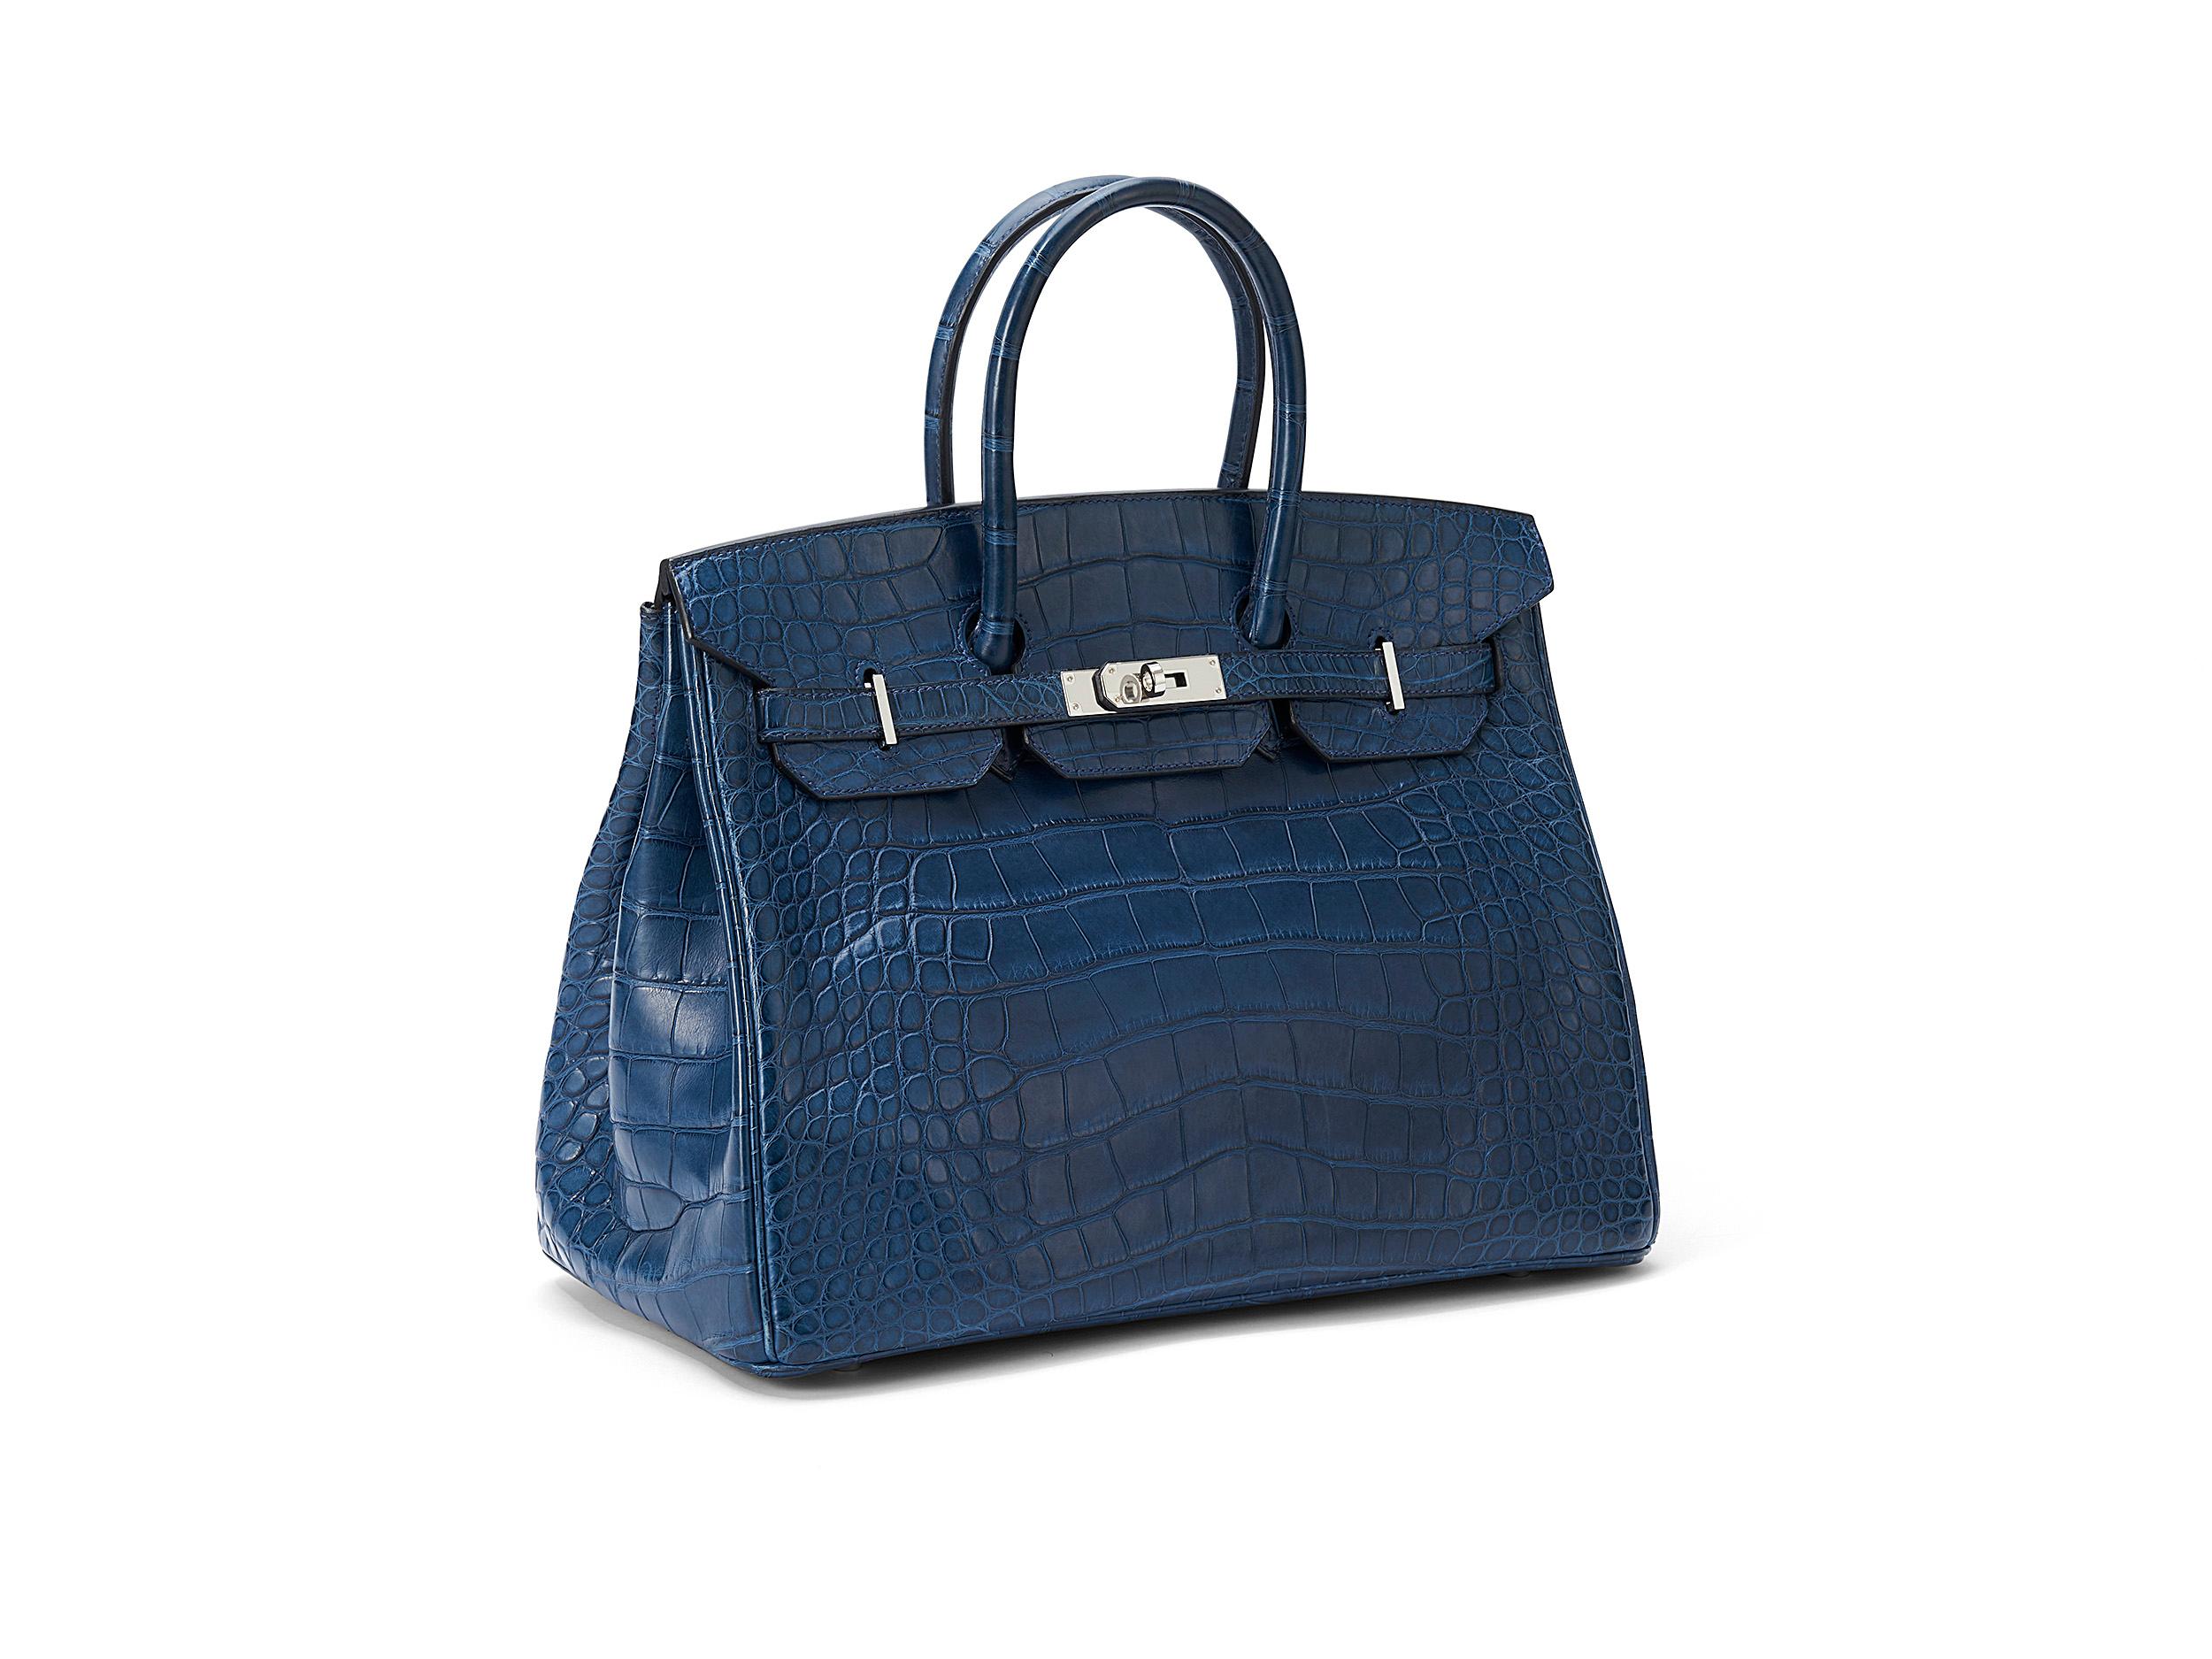 Hermès Birkin 35 in bleu de malte and matte alligator leather with palladium hardware. The bag is unworn but has a small scratch on one foot and a small sign on the inside bottom. Comes as full set including the original receipt and Cites.  Stamp A